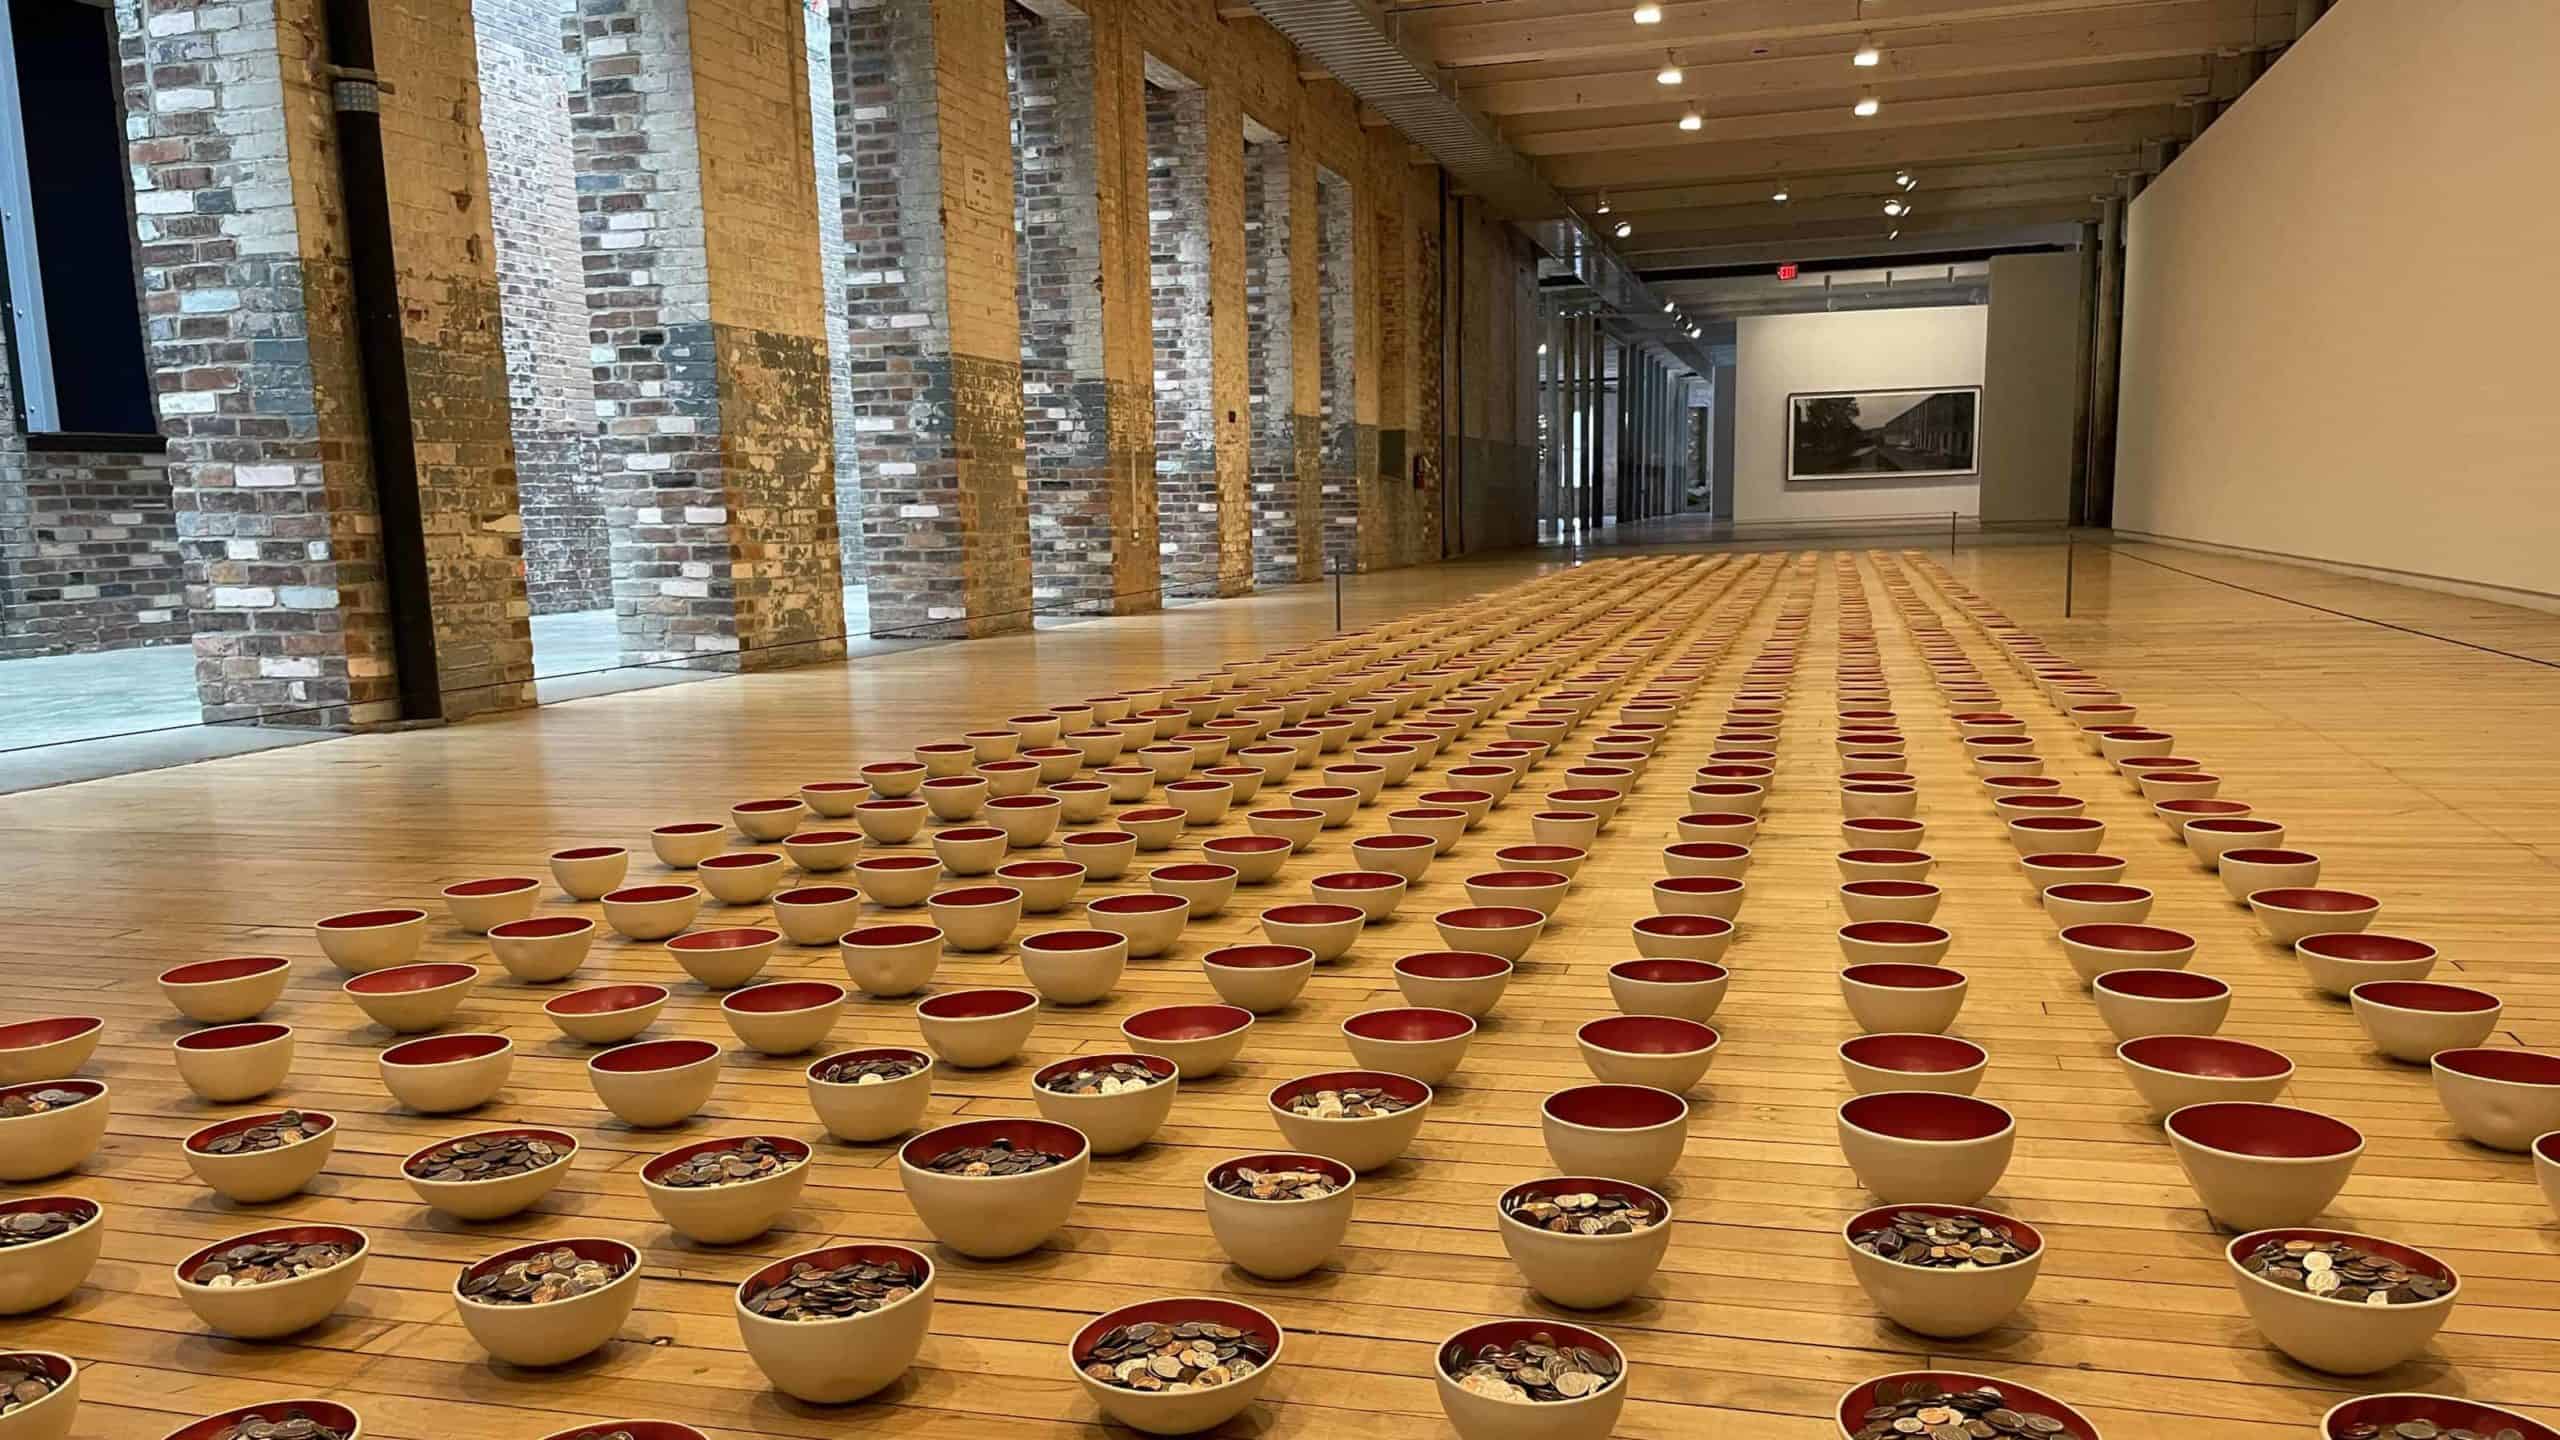 In kelli rae adams - Forever in Your Debt, bowls fill the hallway at Mass MoCA, some filled with coins and sme empty, considering the weight of student loans.